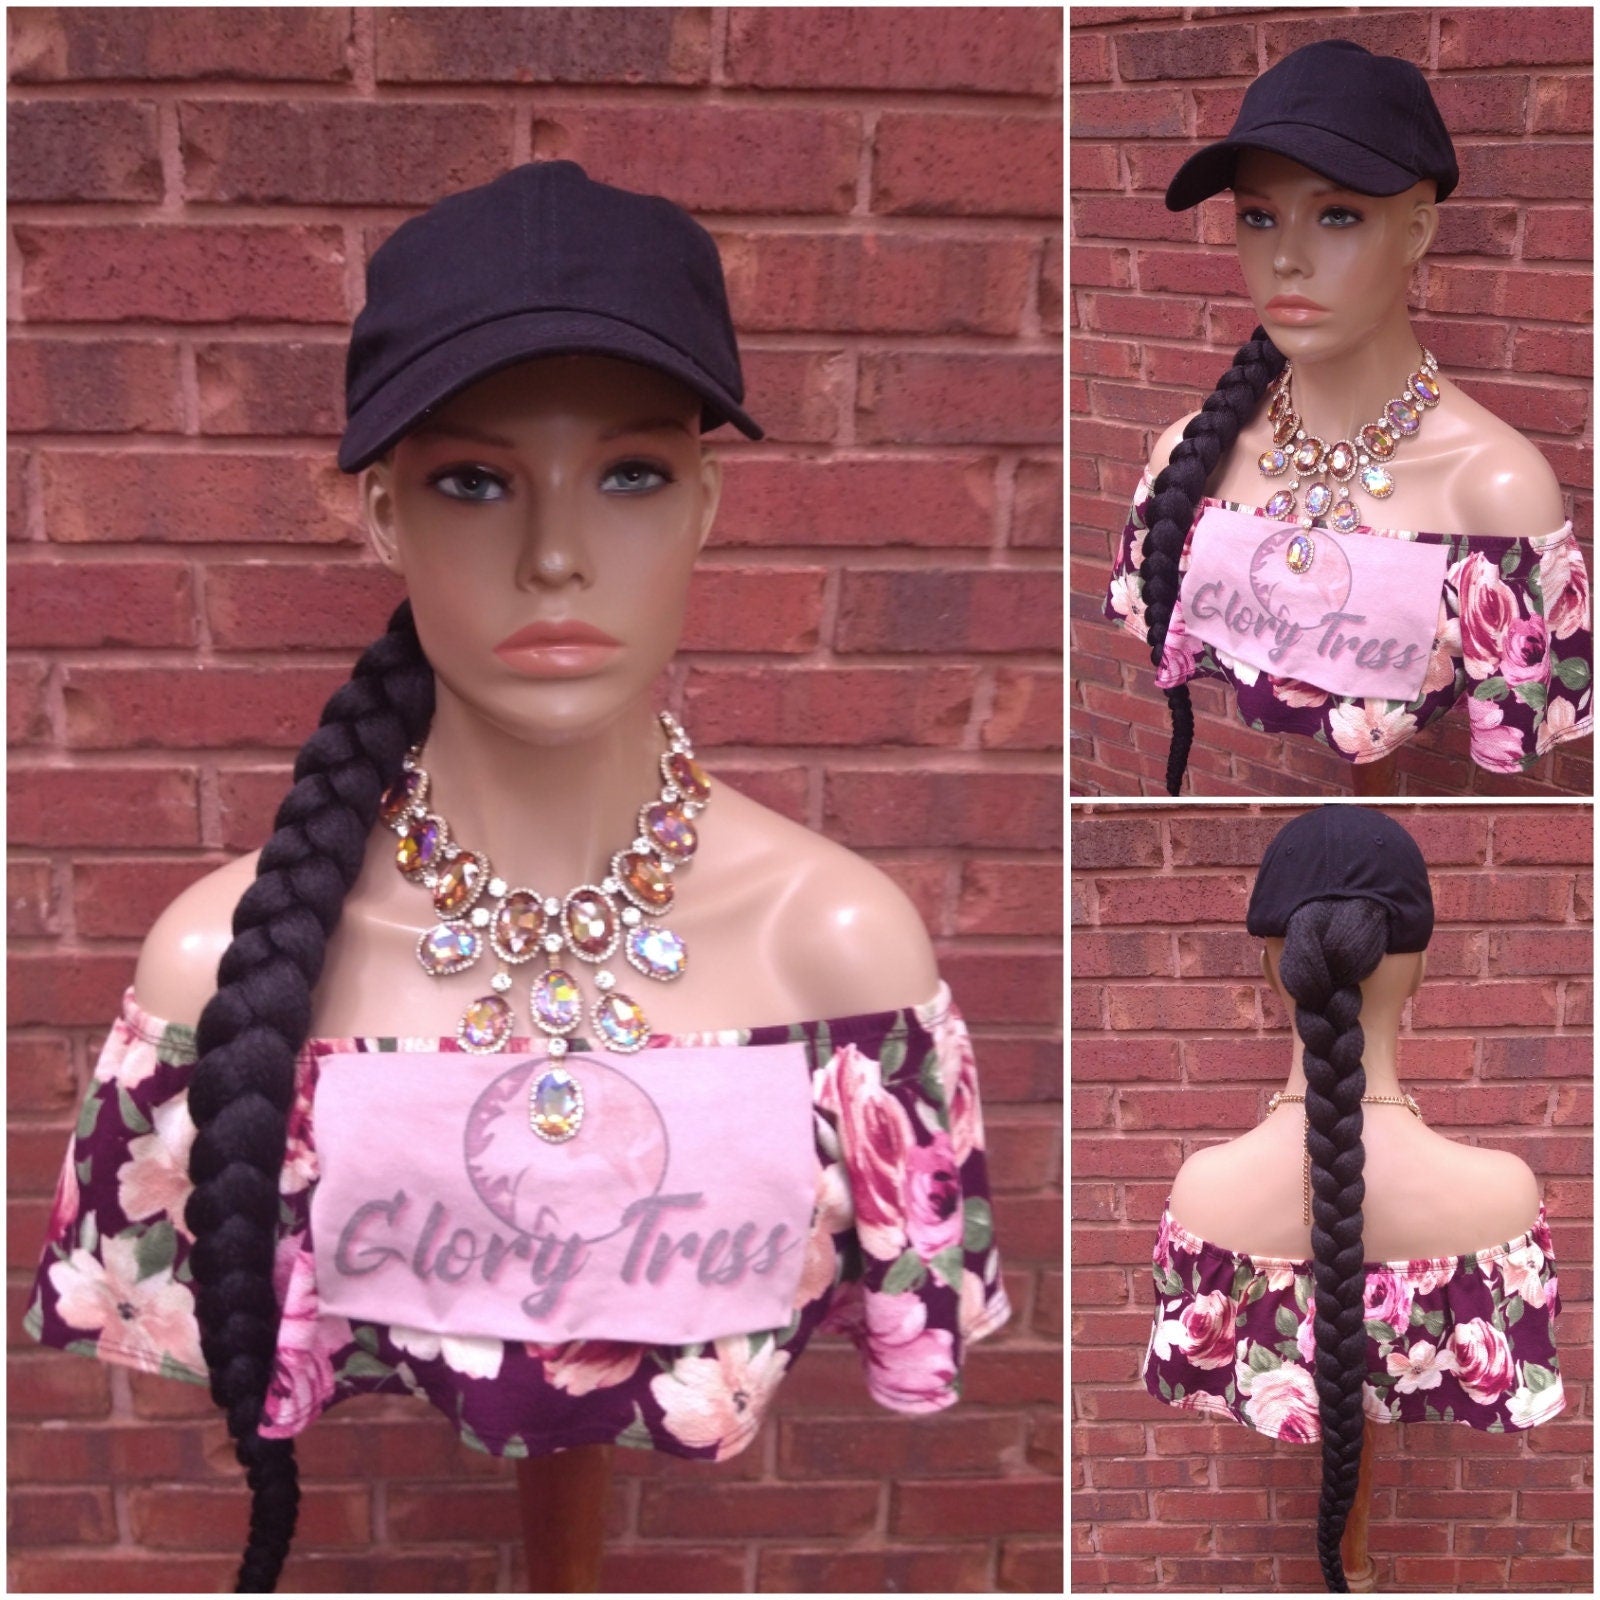 Ponytail Hat Wig, 32" Long Whip Braided Yaki Texture Ponytail, Throw On An Go Wigs, Black Ponytail, African American Hairstyle //WHIP